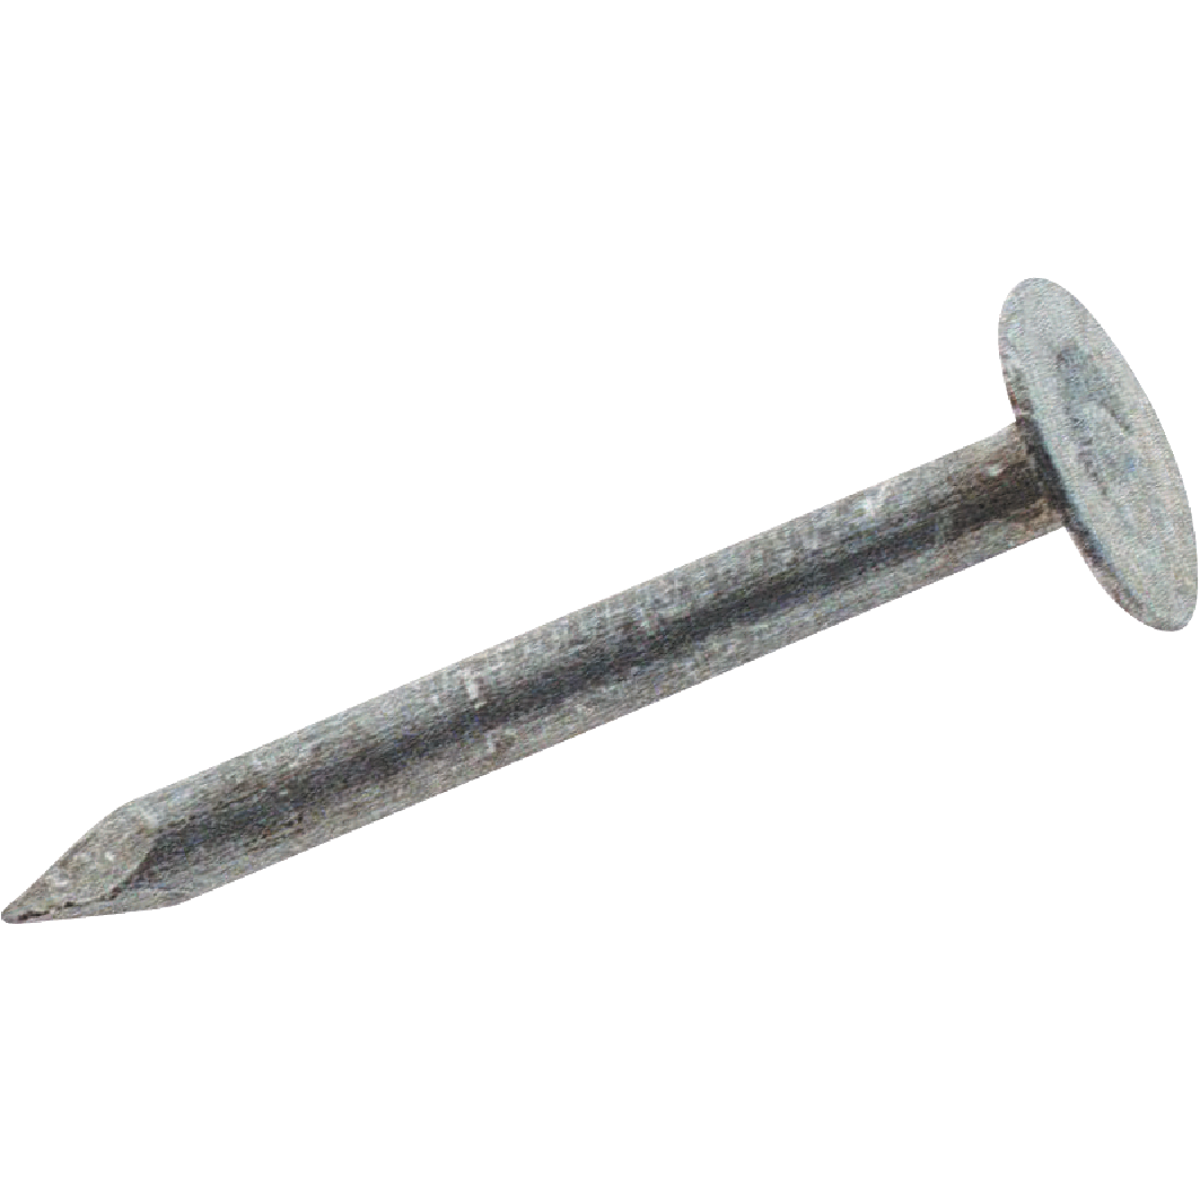 GripRite 2 In. 11 ga Electrogalvanized Roofing Nails (4320 Ct., 30 Lb.) 764666165052 eBay